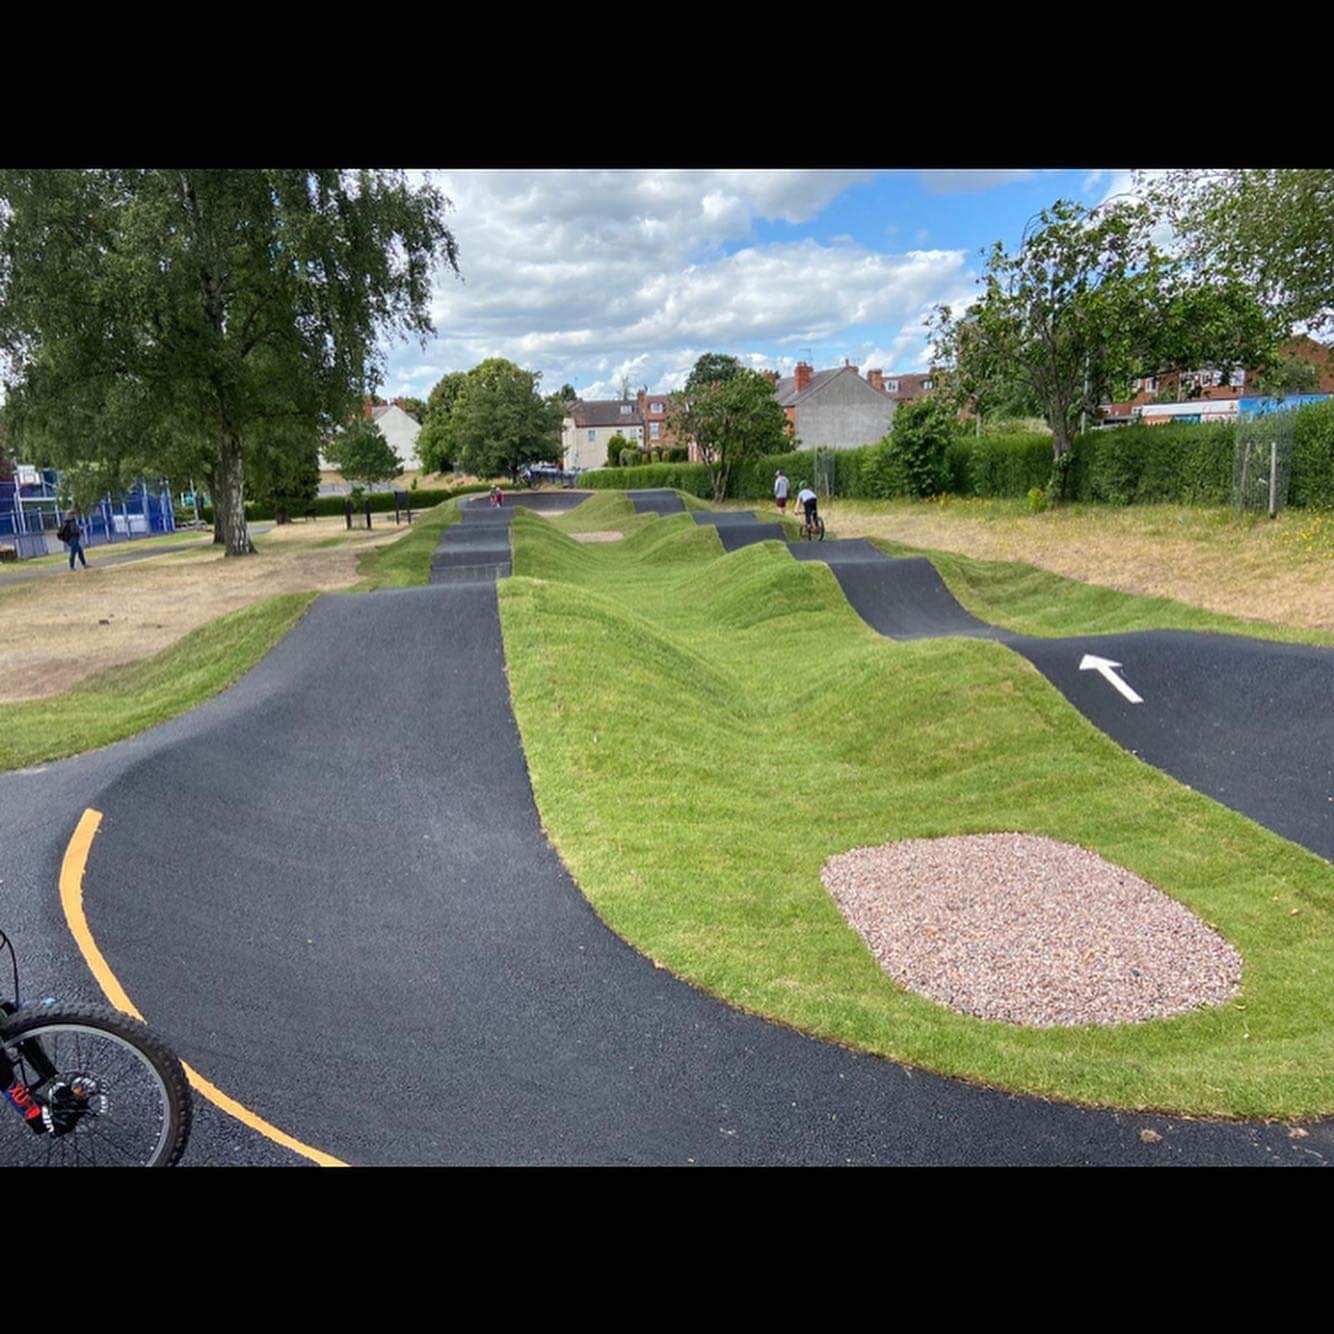 Pump track in St George's park